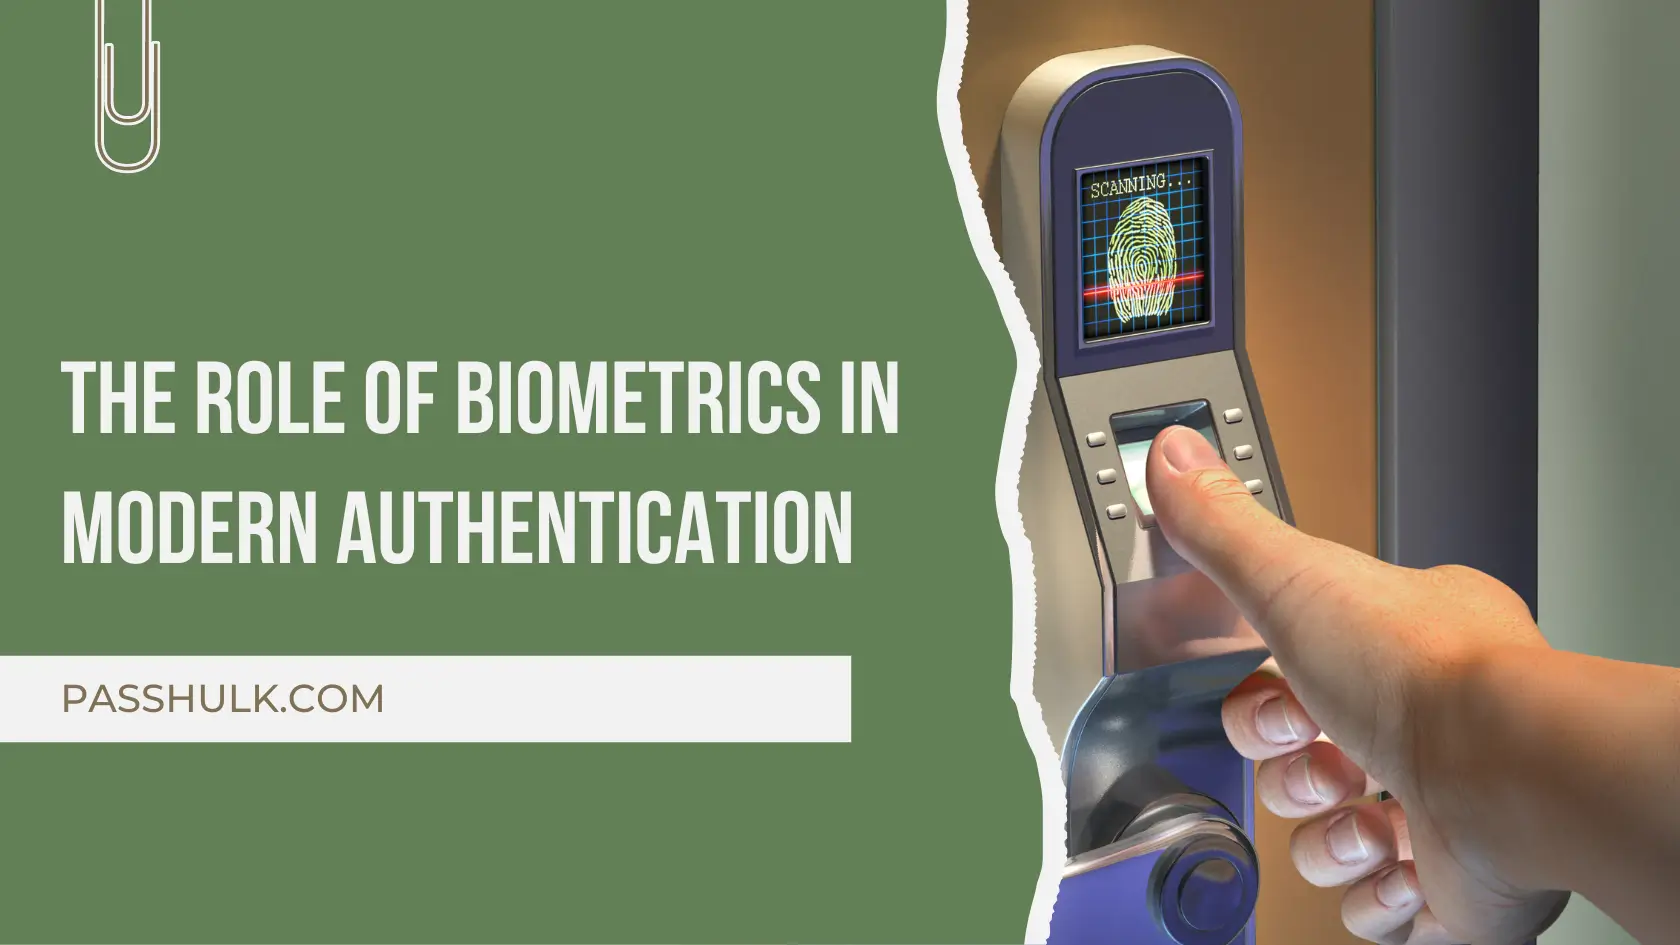 The Role of Biometrics in Modern Authentication